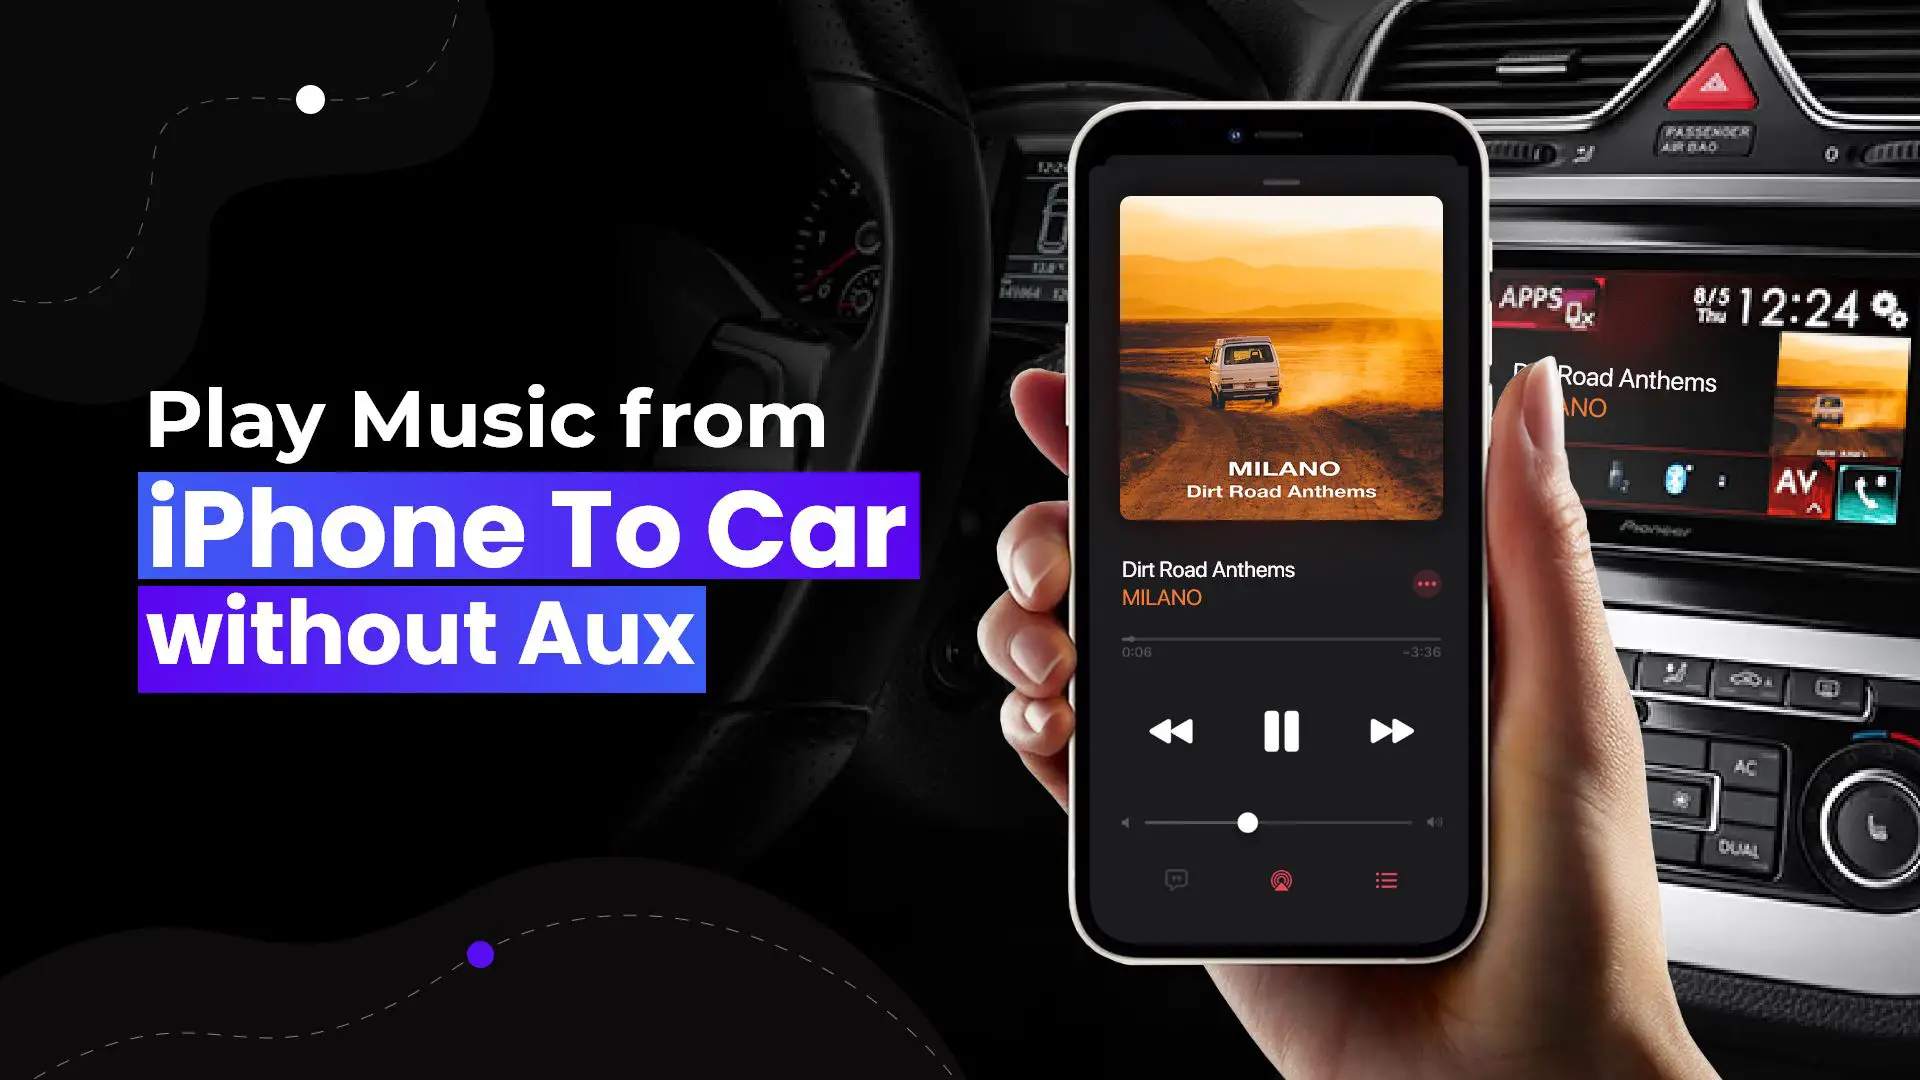 How to Play Music from iPhone to Car without Aux or Bluetooth